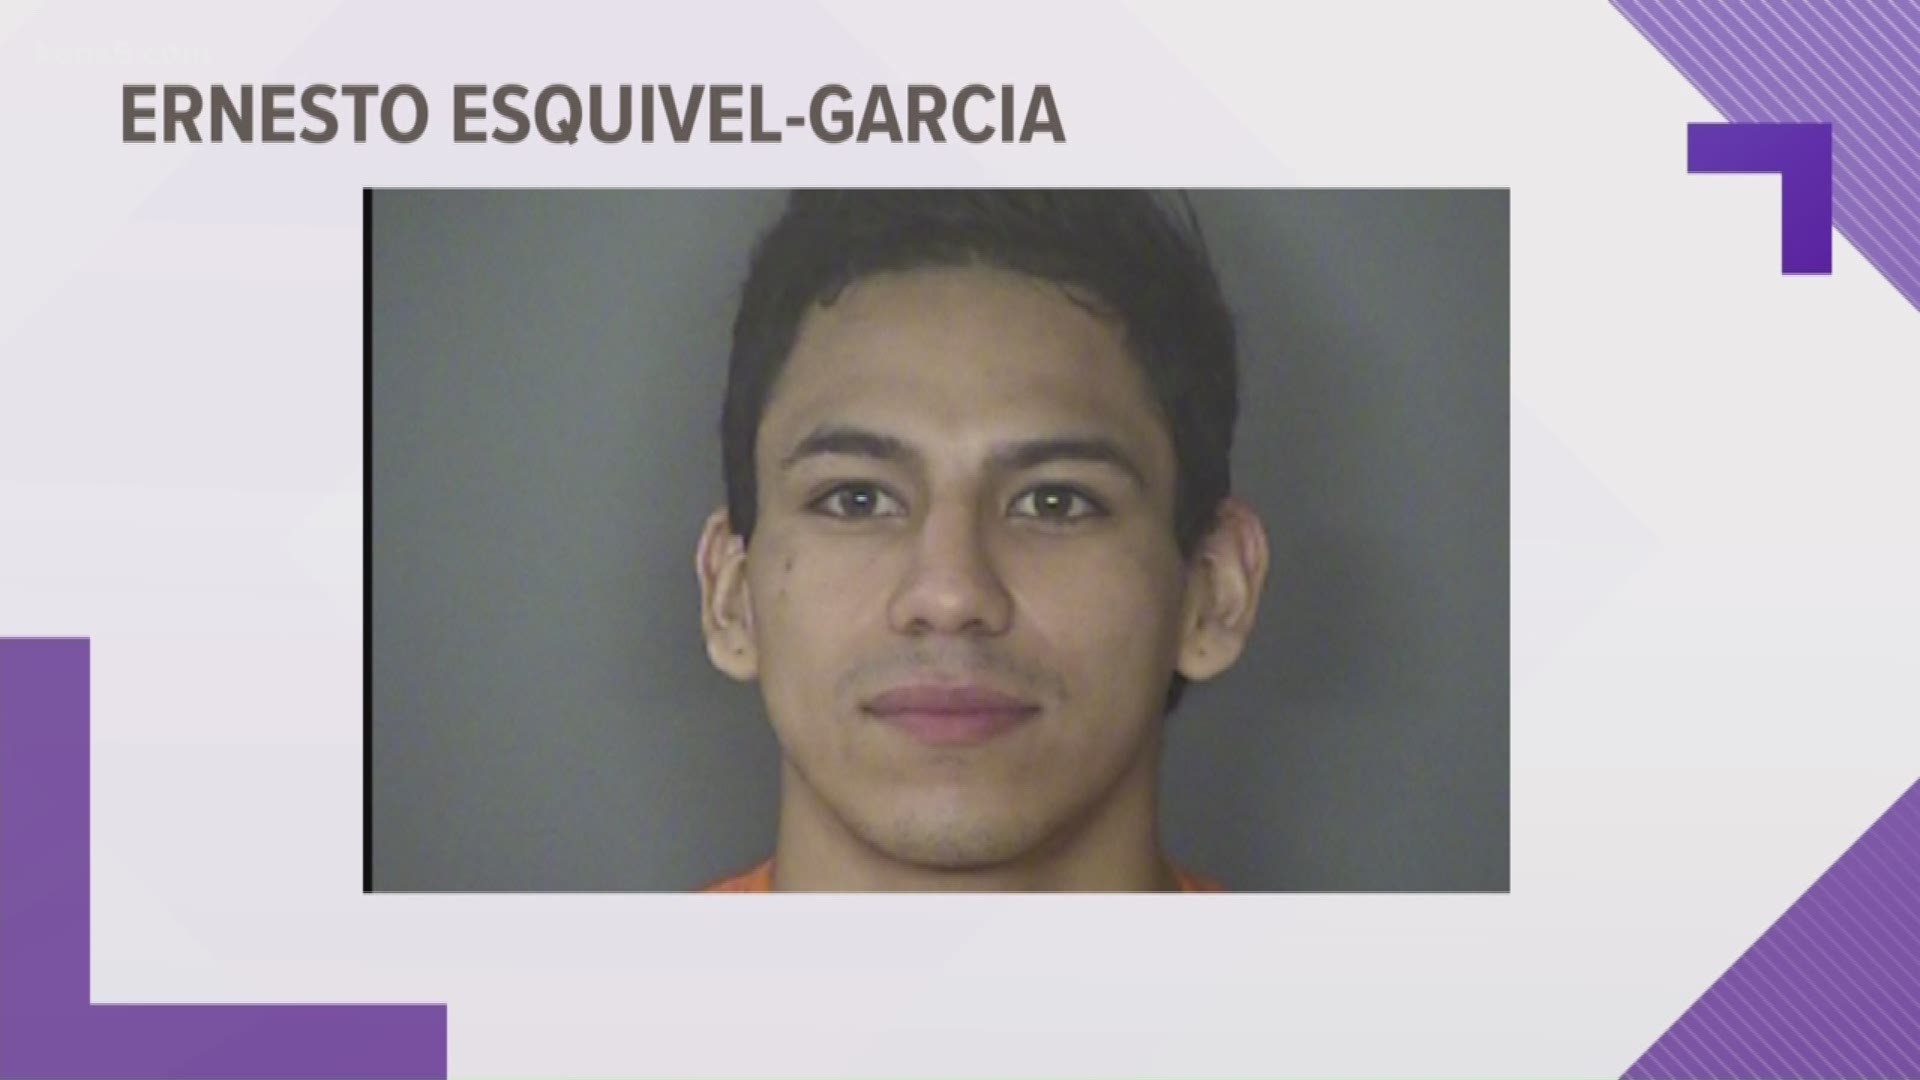 20-year-old Ernesto Esquivel-Garcia is accused of killing 20-year-old Jared Vargas at an apartment on Jones Maltsberger Road on June 18.